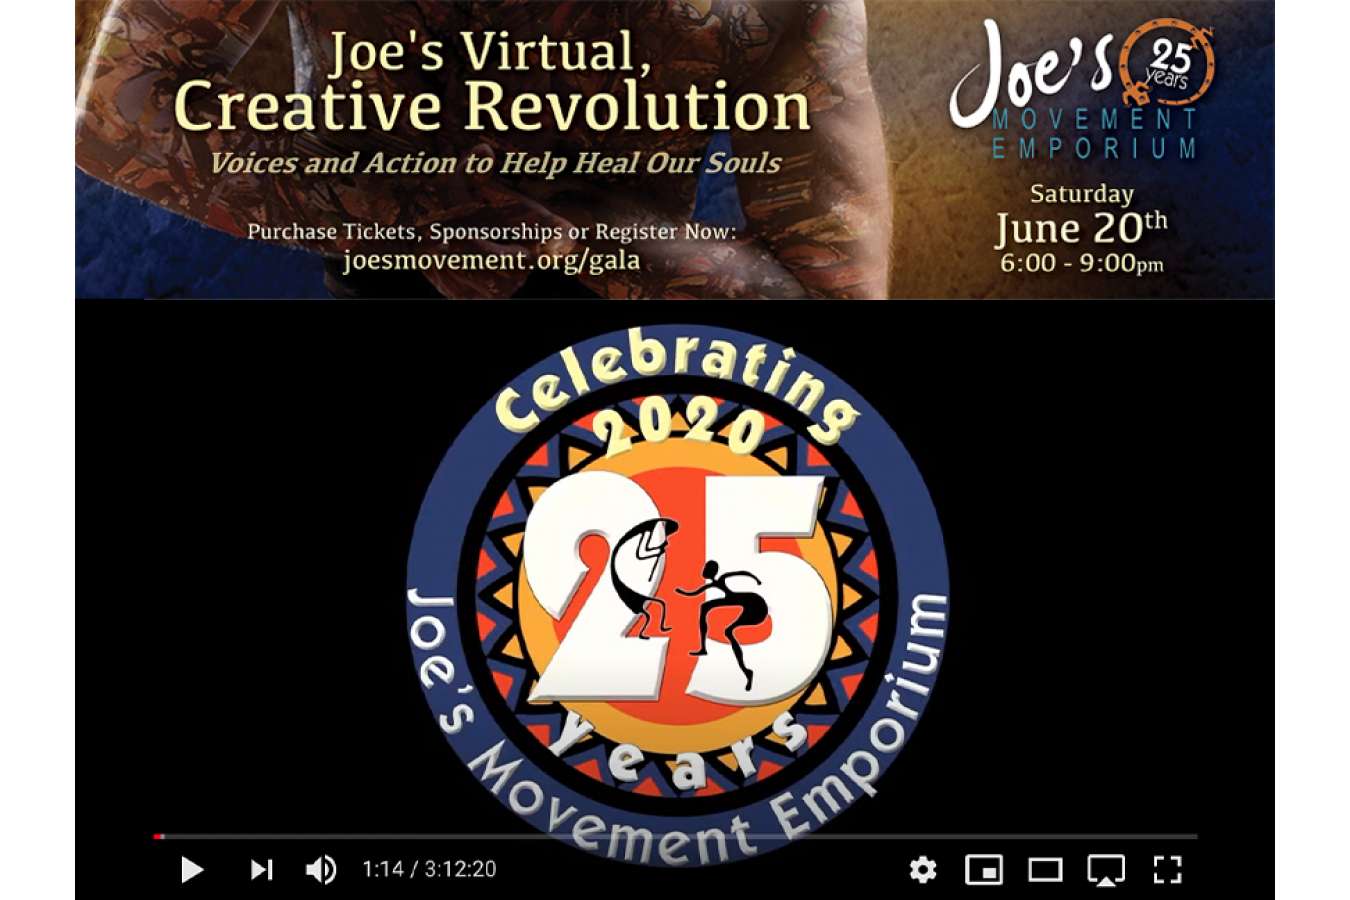 1 JVCR Header : Joe's Creative Revolution, brings you a powerful evening of movement, hope and healing. In an extraordinary moment, we lead community forward, fighting a local pandemic and racial injustice across the country.